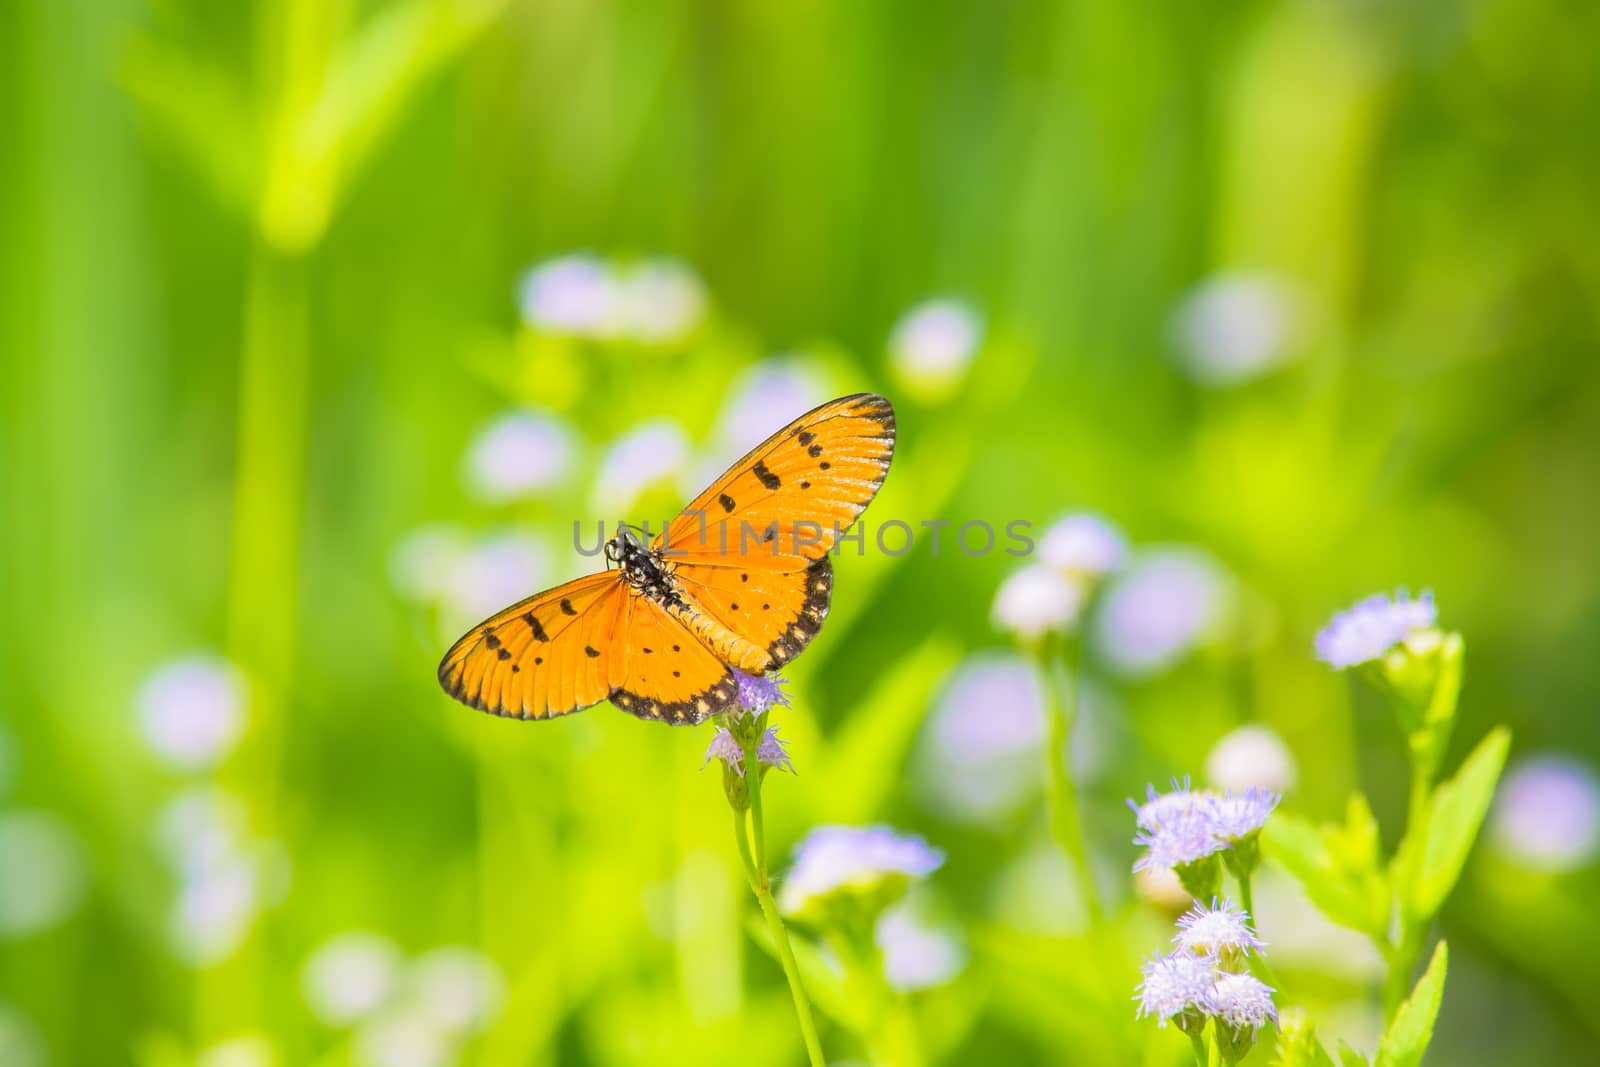 Tawny Coaster butterfly, Acraea violae on wild weed flower.